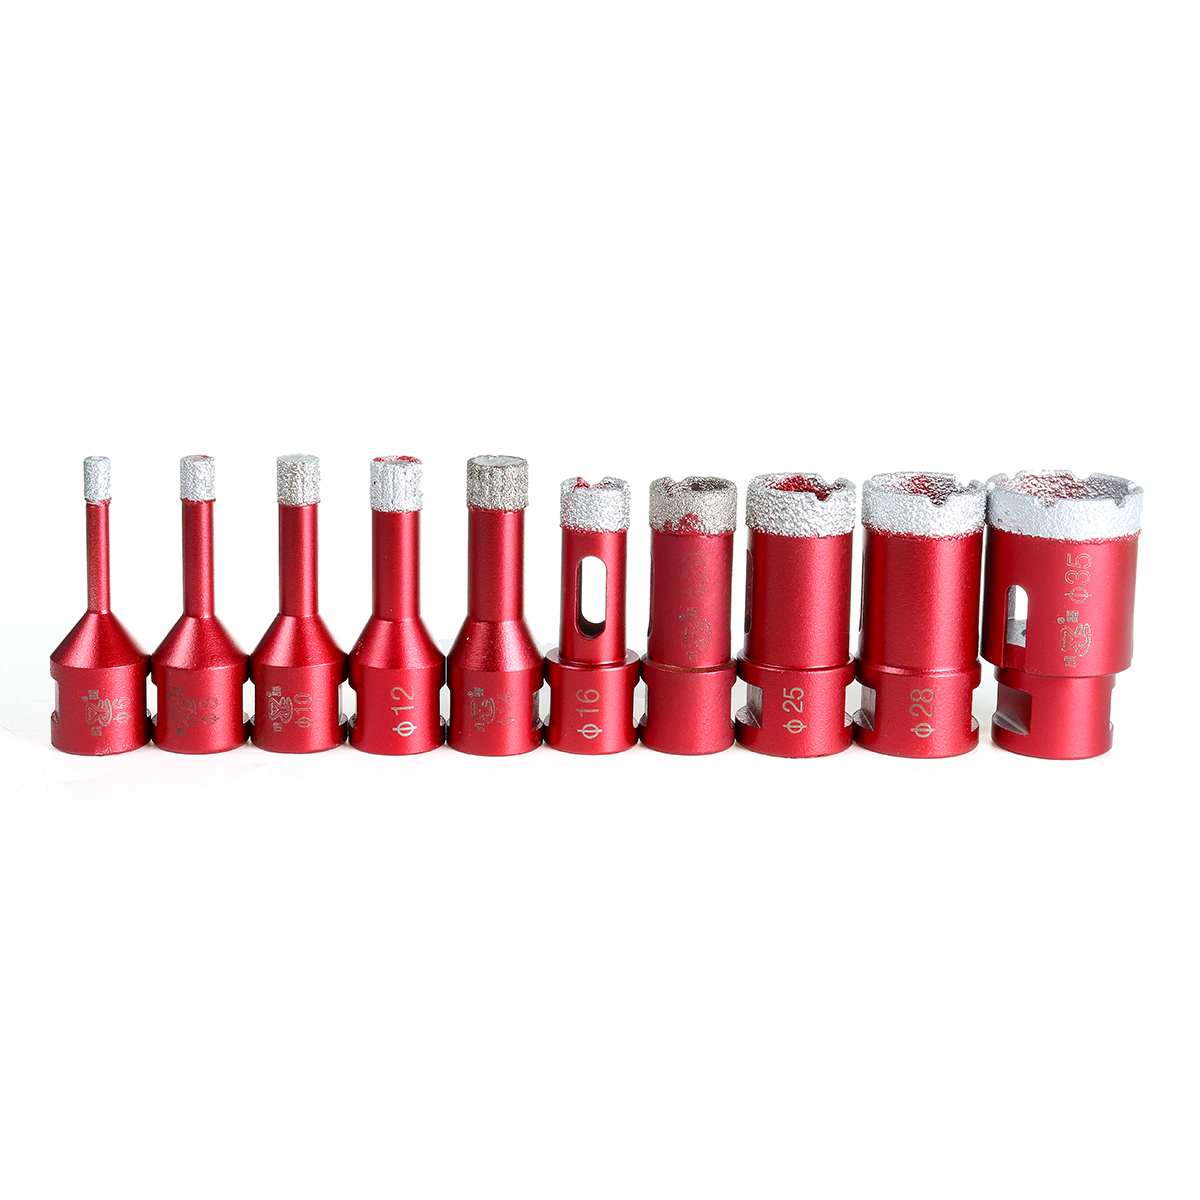 6mm-35mm-M14-Diamond-Drill-Bits-Drilling-Hole-Saw-Cutter-for-Tile-Marble-Granite-Stone-Use-Angle-Gri-1557775-3